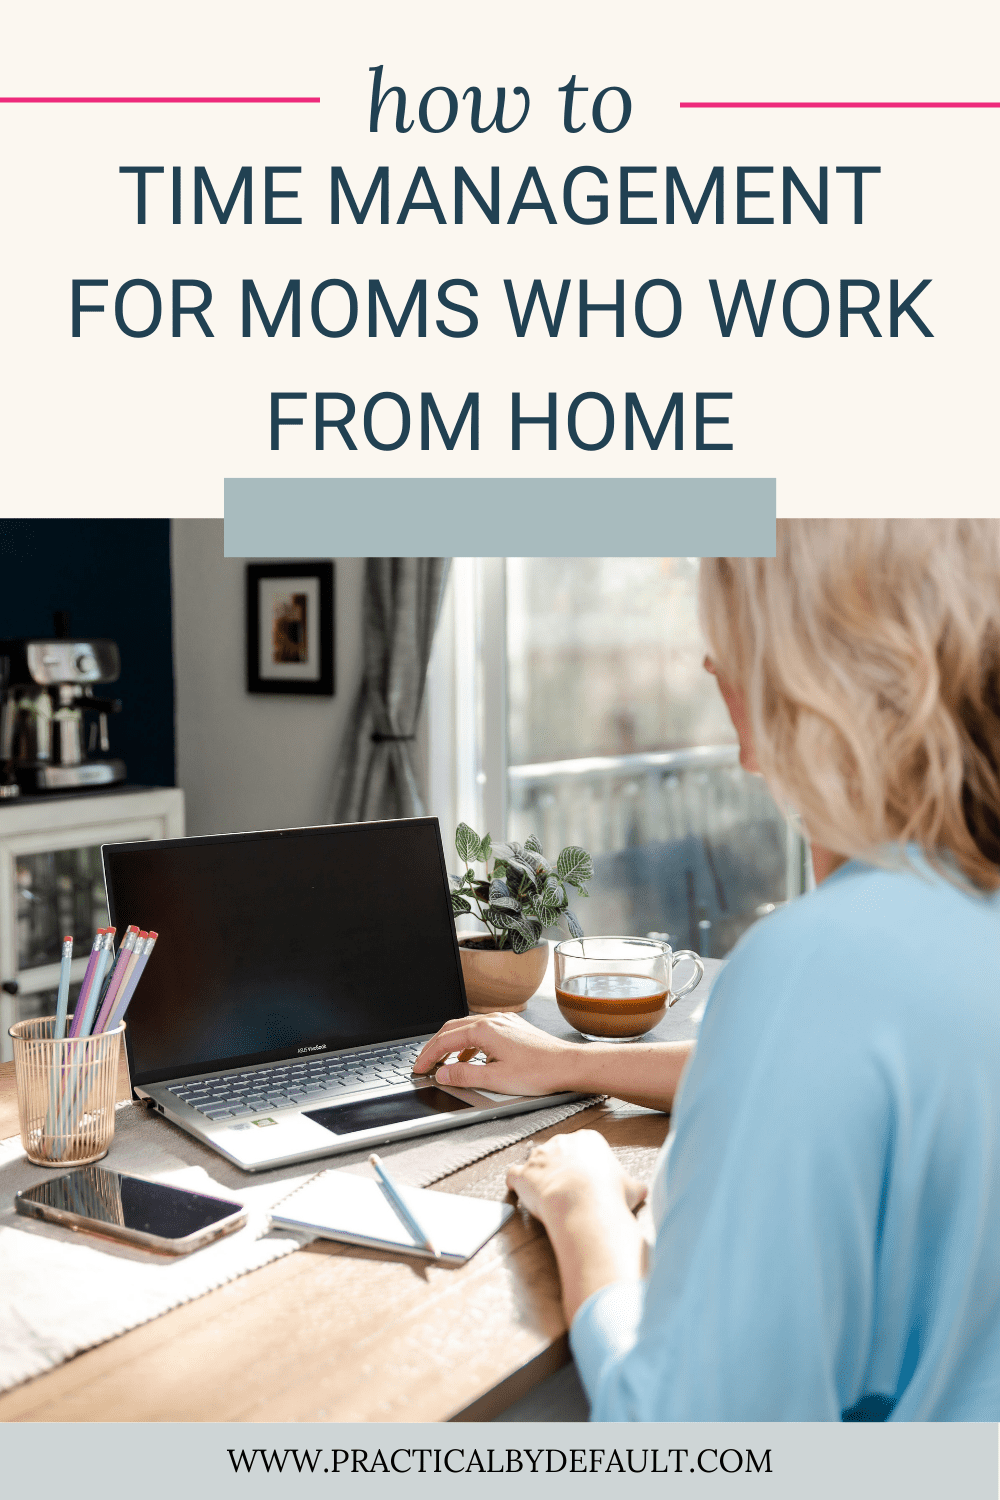 Time Management For Moms Who Work From Home